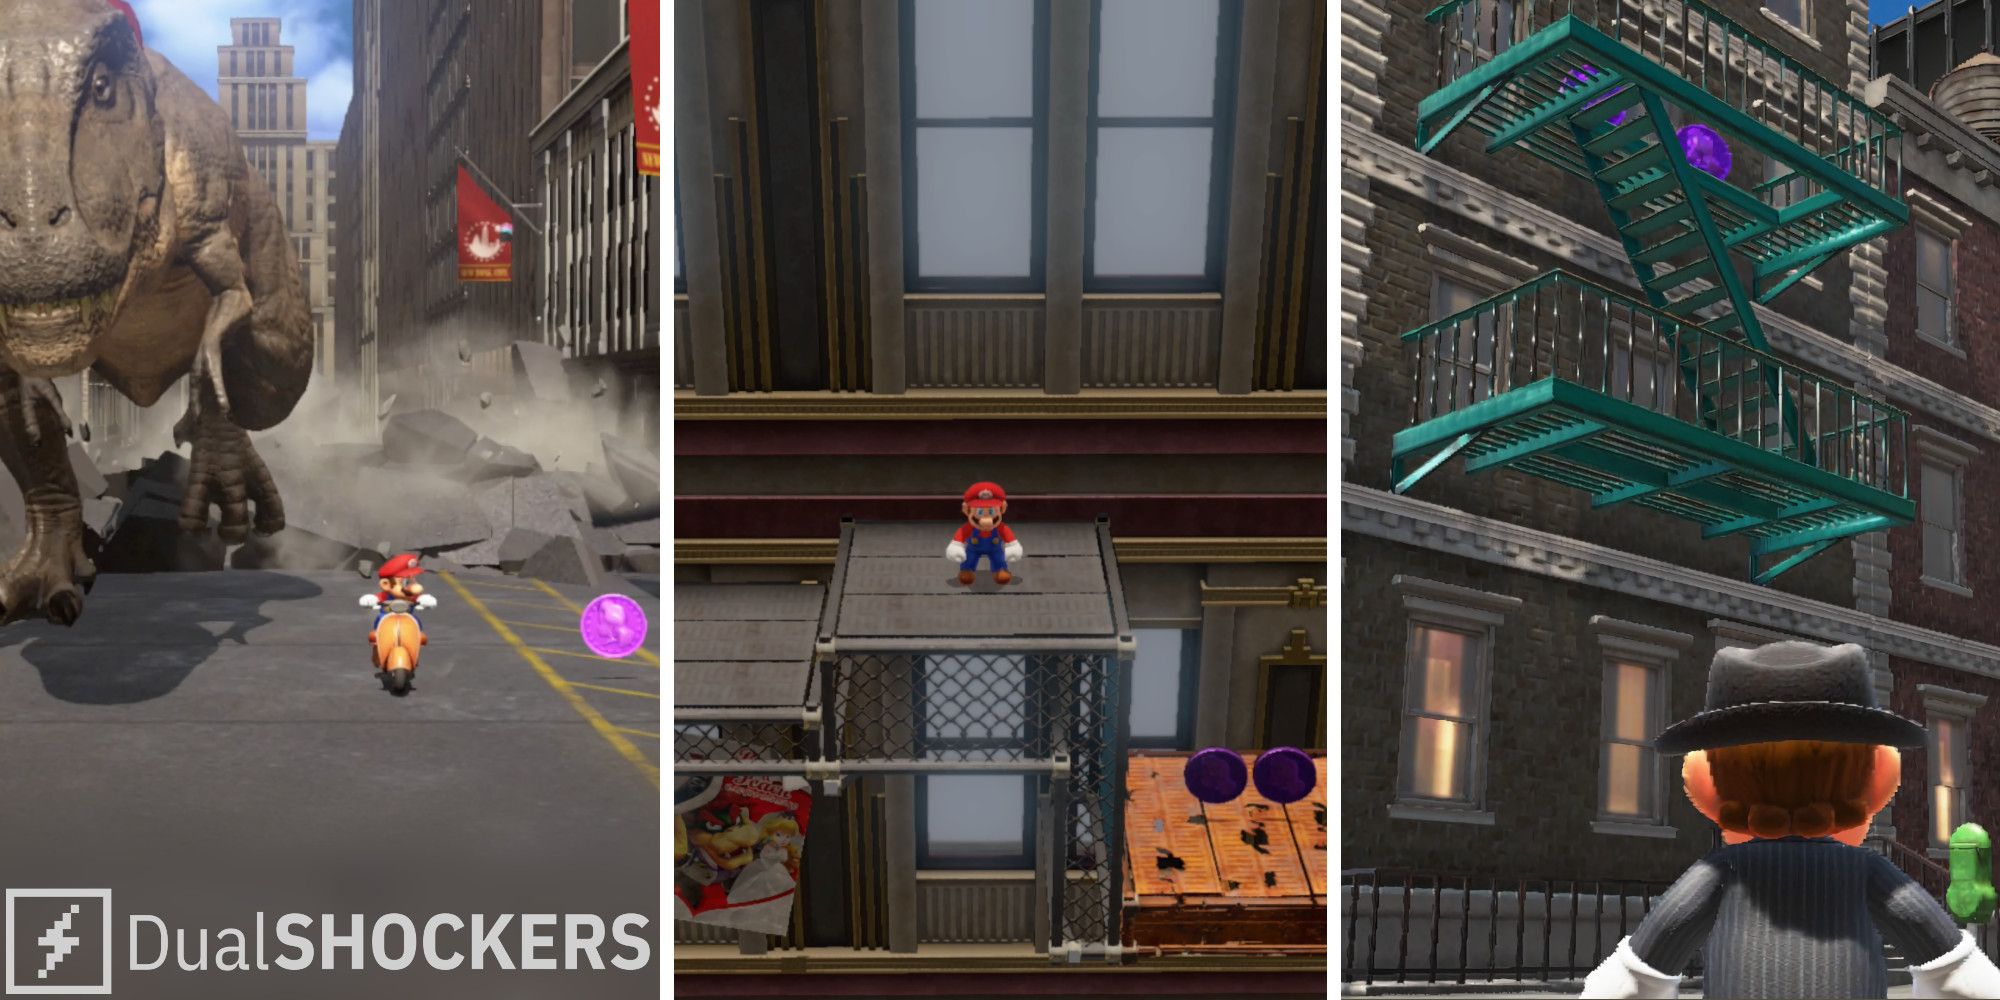 Super Mario Odyssey New Donk City split image Mario riding vehicle, on rooftop and in suit.